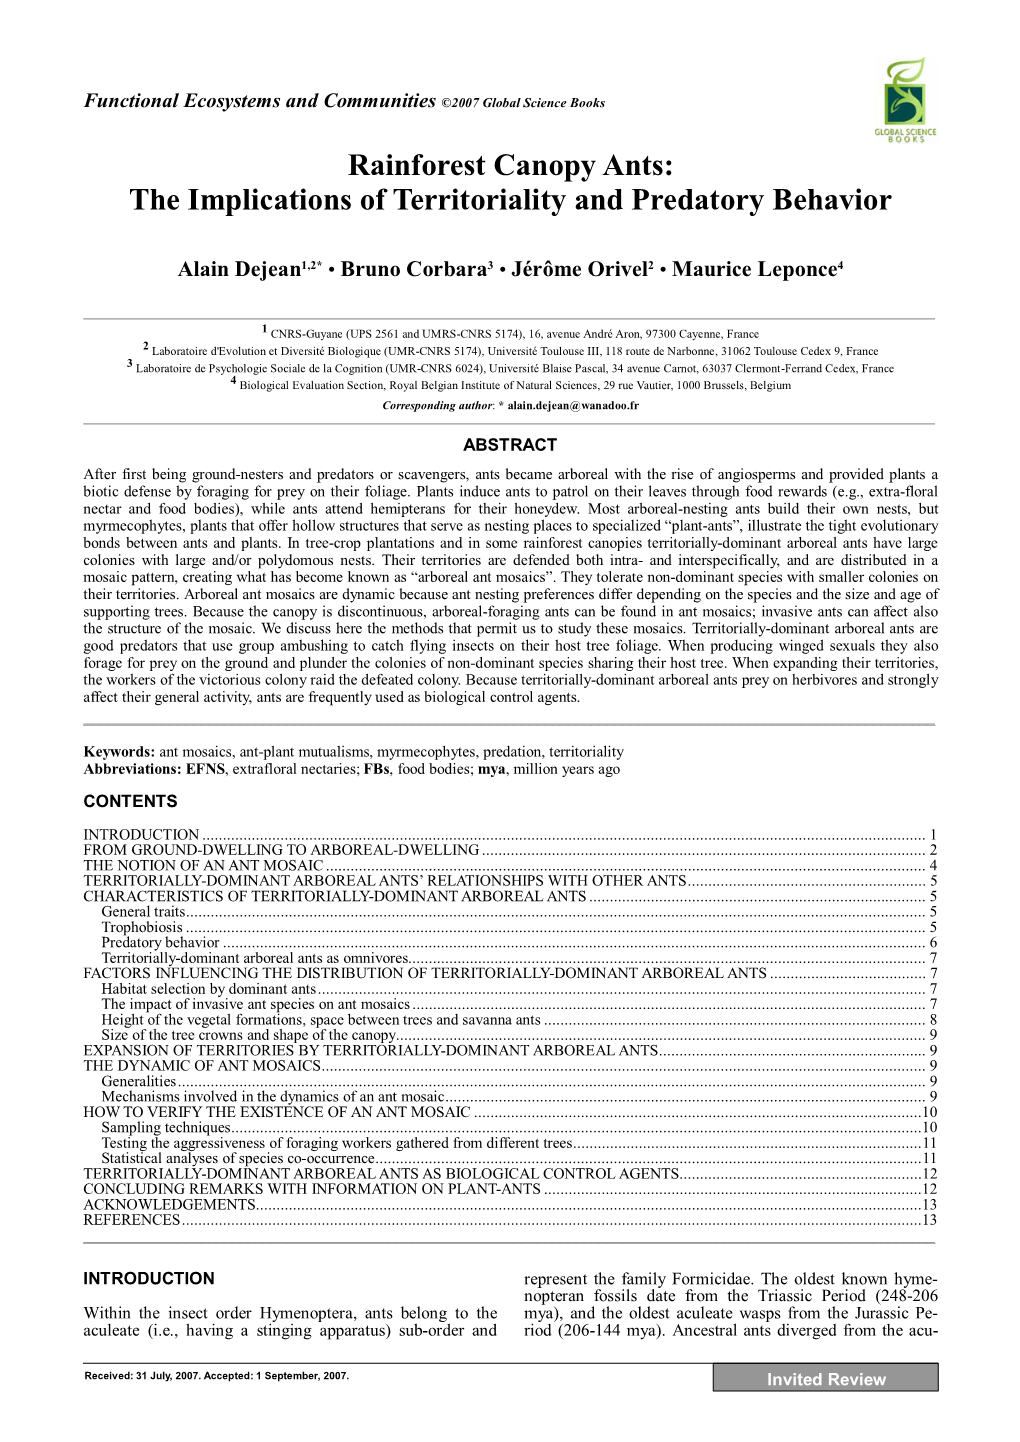 Rainforest Canopy Ants: the Implications of Territoriality and Predatory Behavior Alain Dejean1,2* • Bruno Corbara3 • Jérôme Orivel2 • Maurice Leponce4